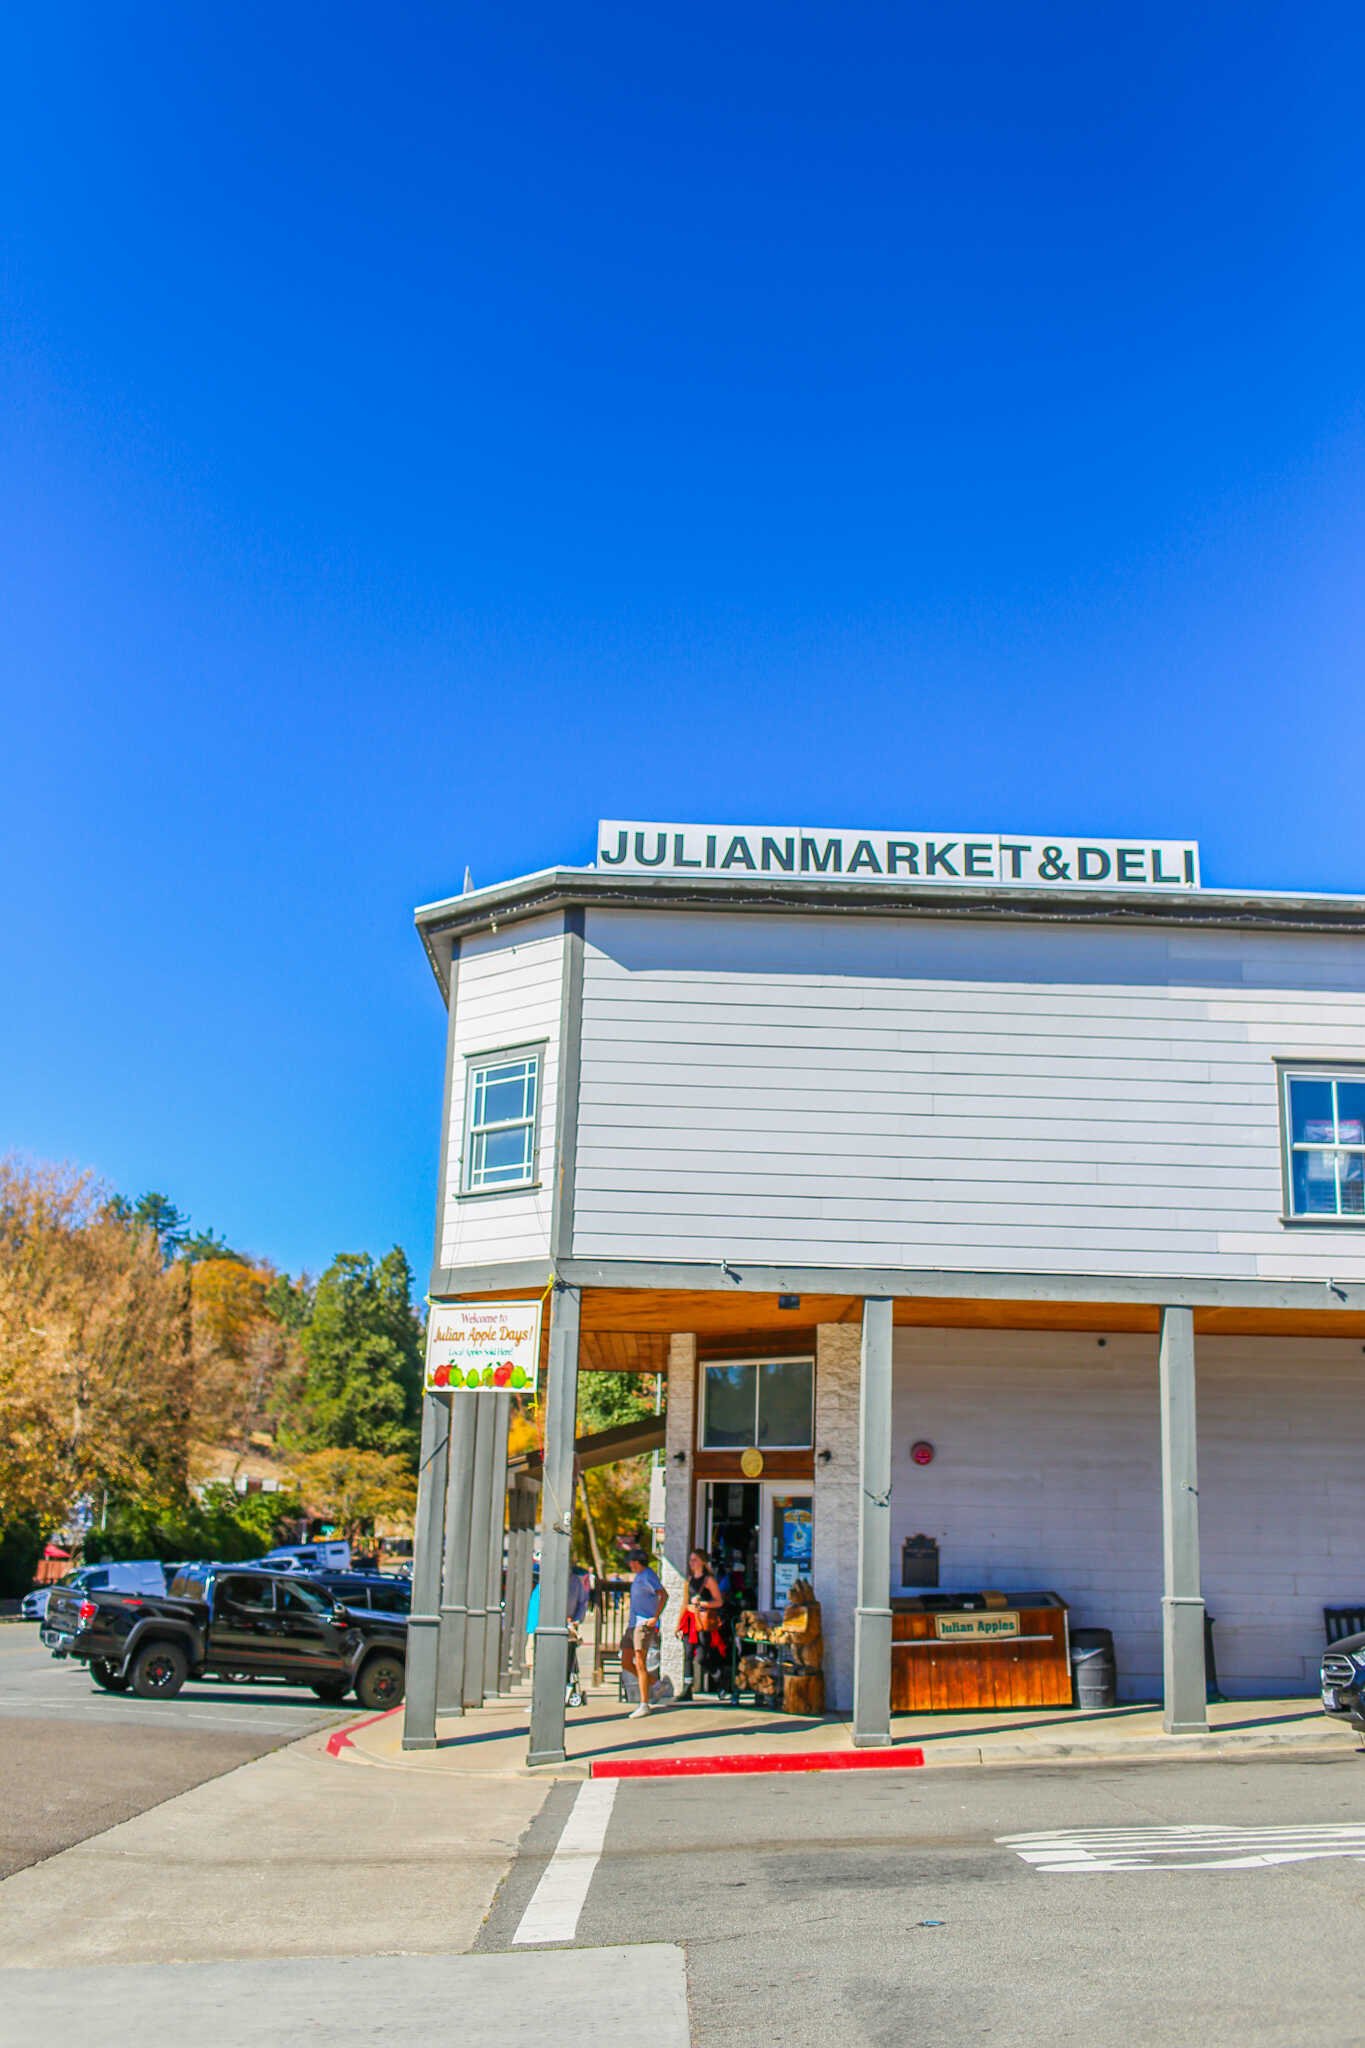 The Complete Travel Guide to Julian, California - The Julian Market and Deli where you can pick up sandwiches and snacks.